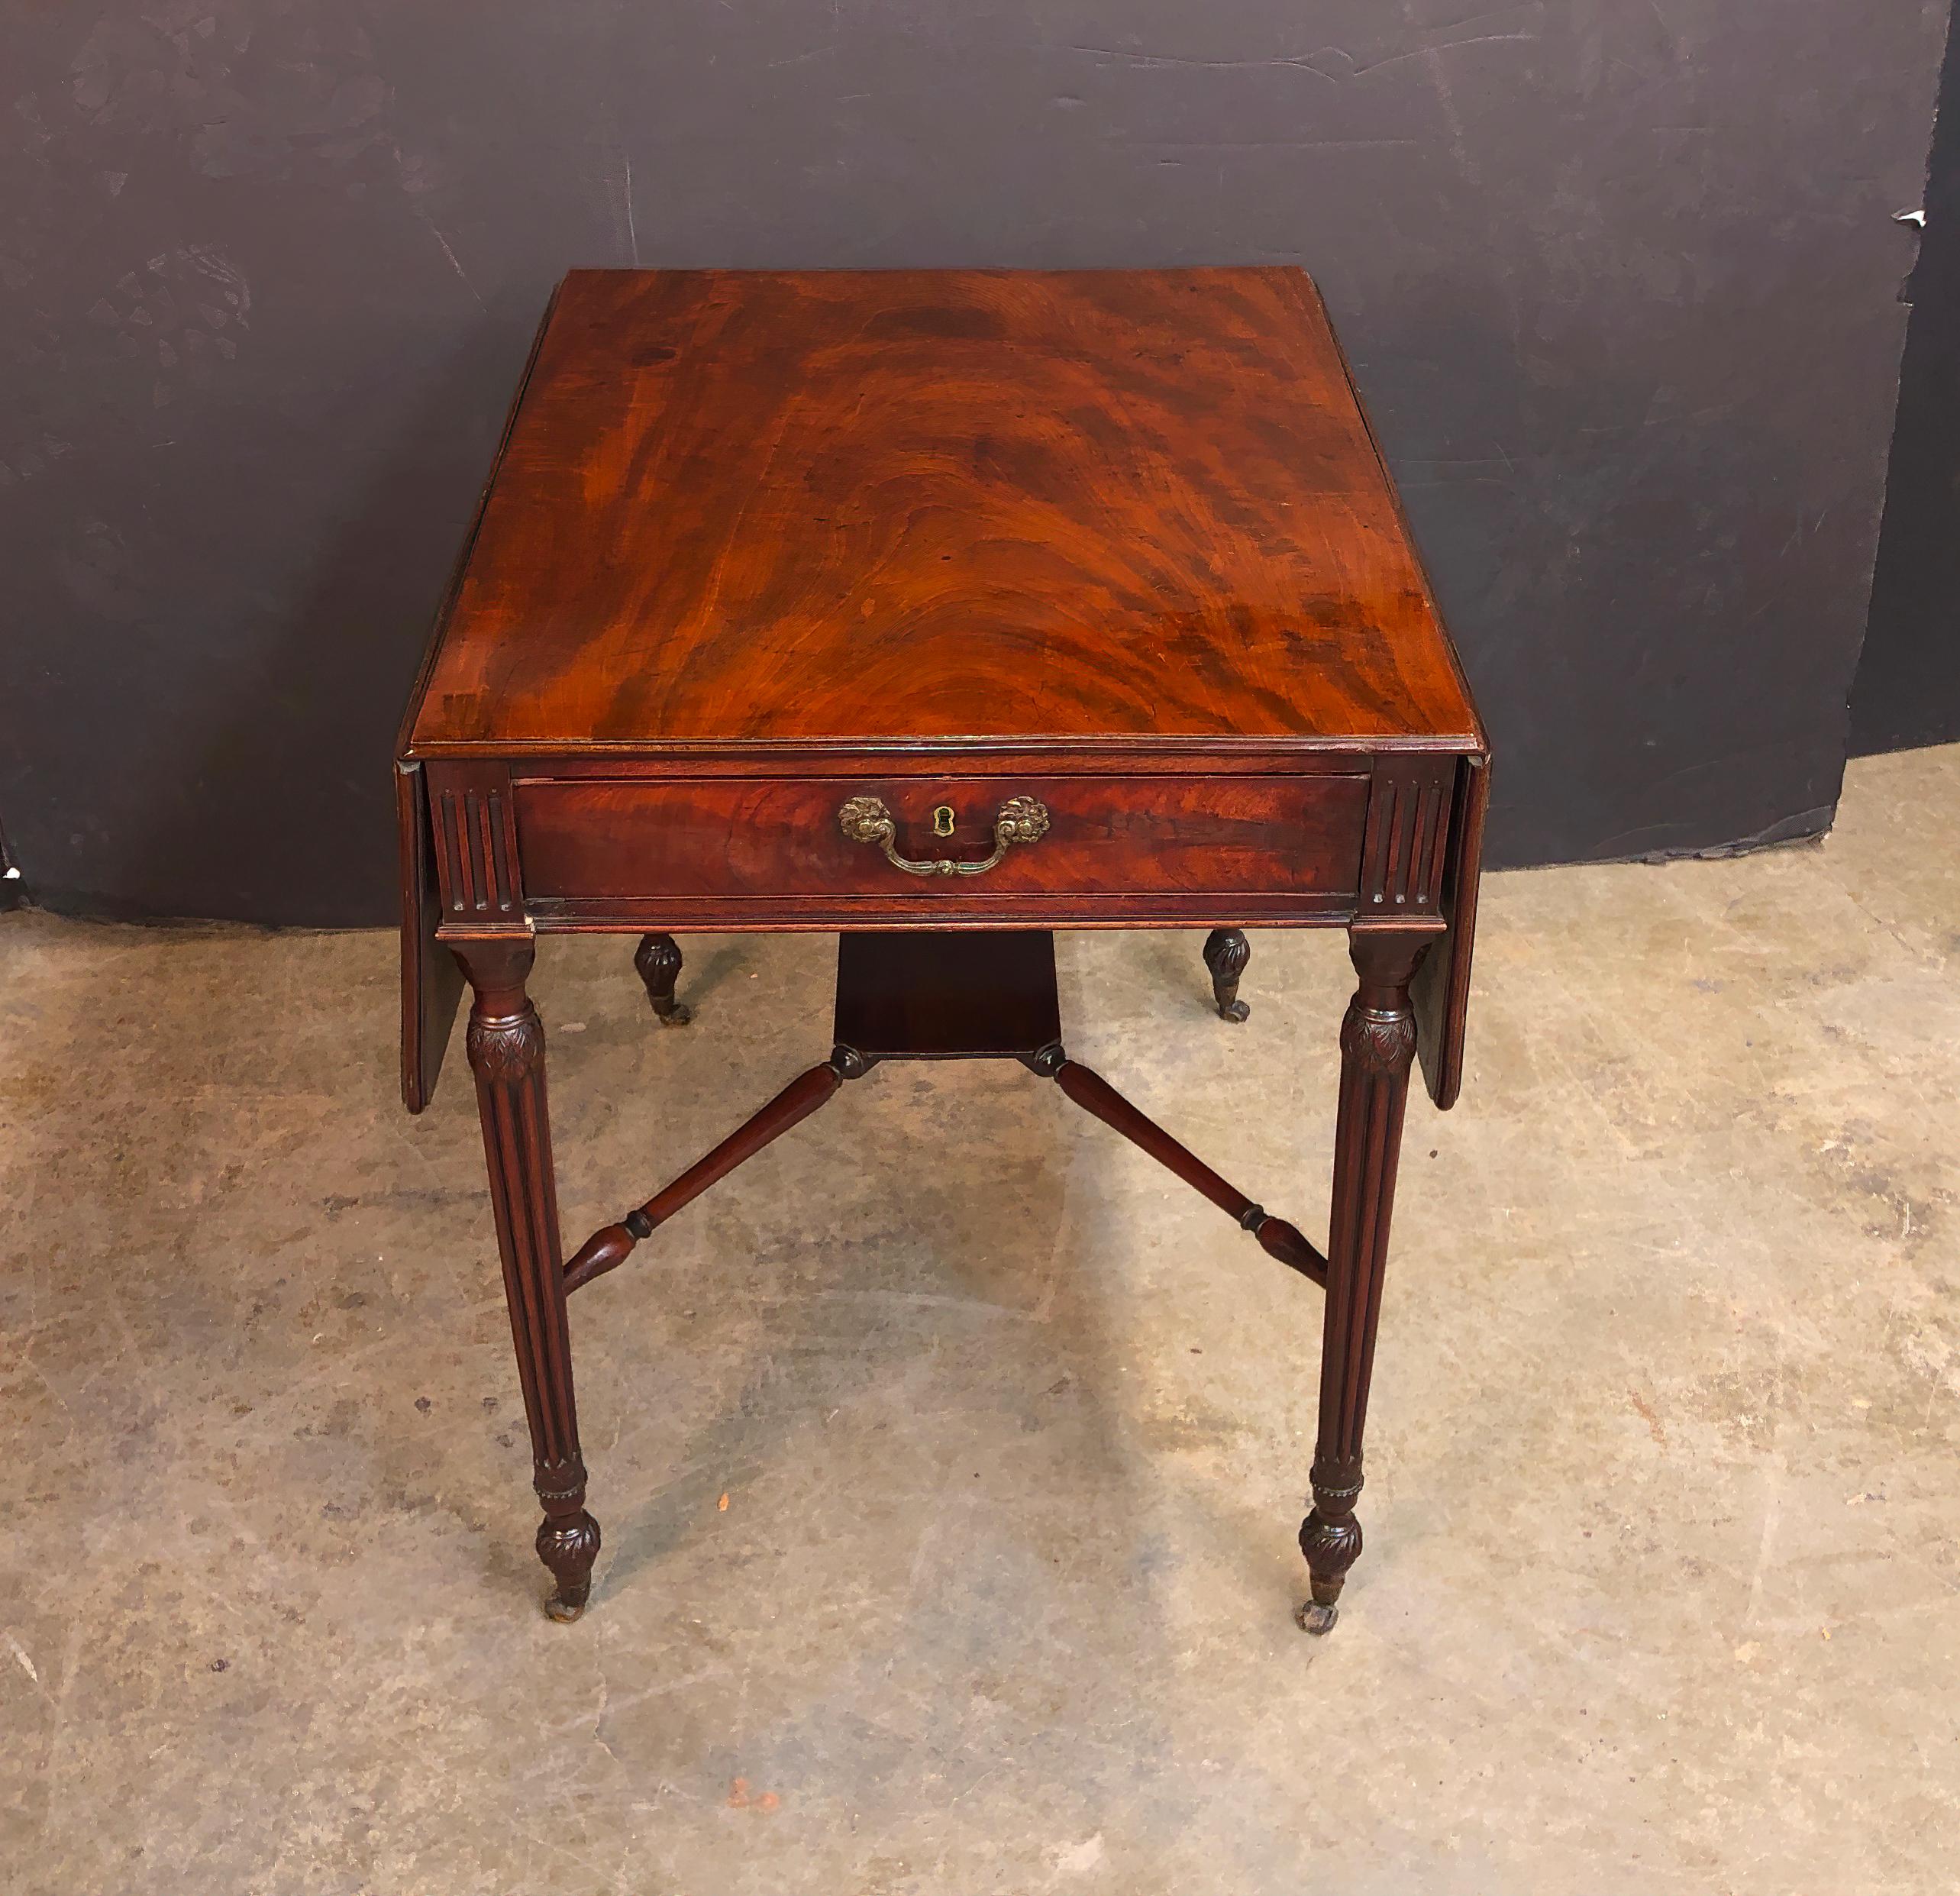 A fine English mahogany Pembroke table with beautifully figured mahogany, a molded edge, with single drawers, on leaf, carved and turned and fluted legs with an X-stretcher, twisted and reeded feet and raised on casters.